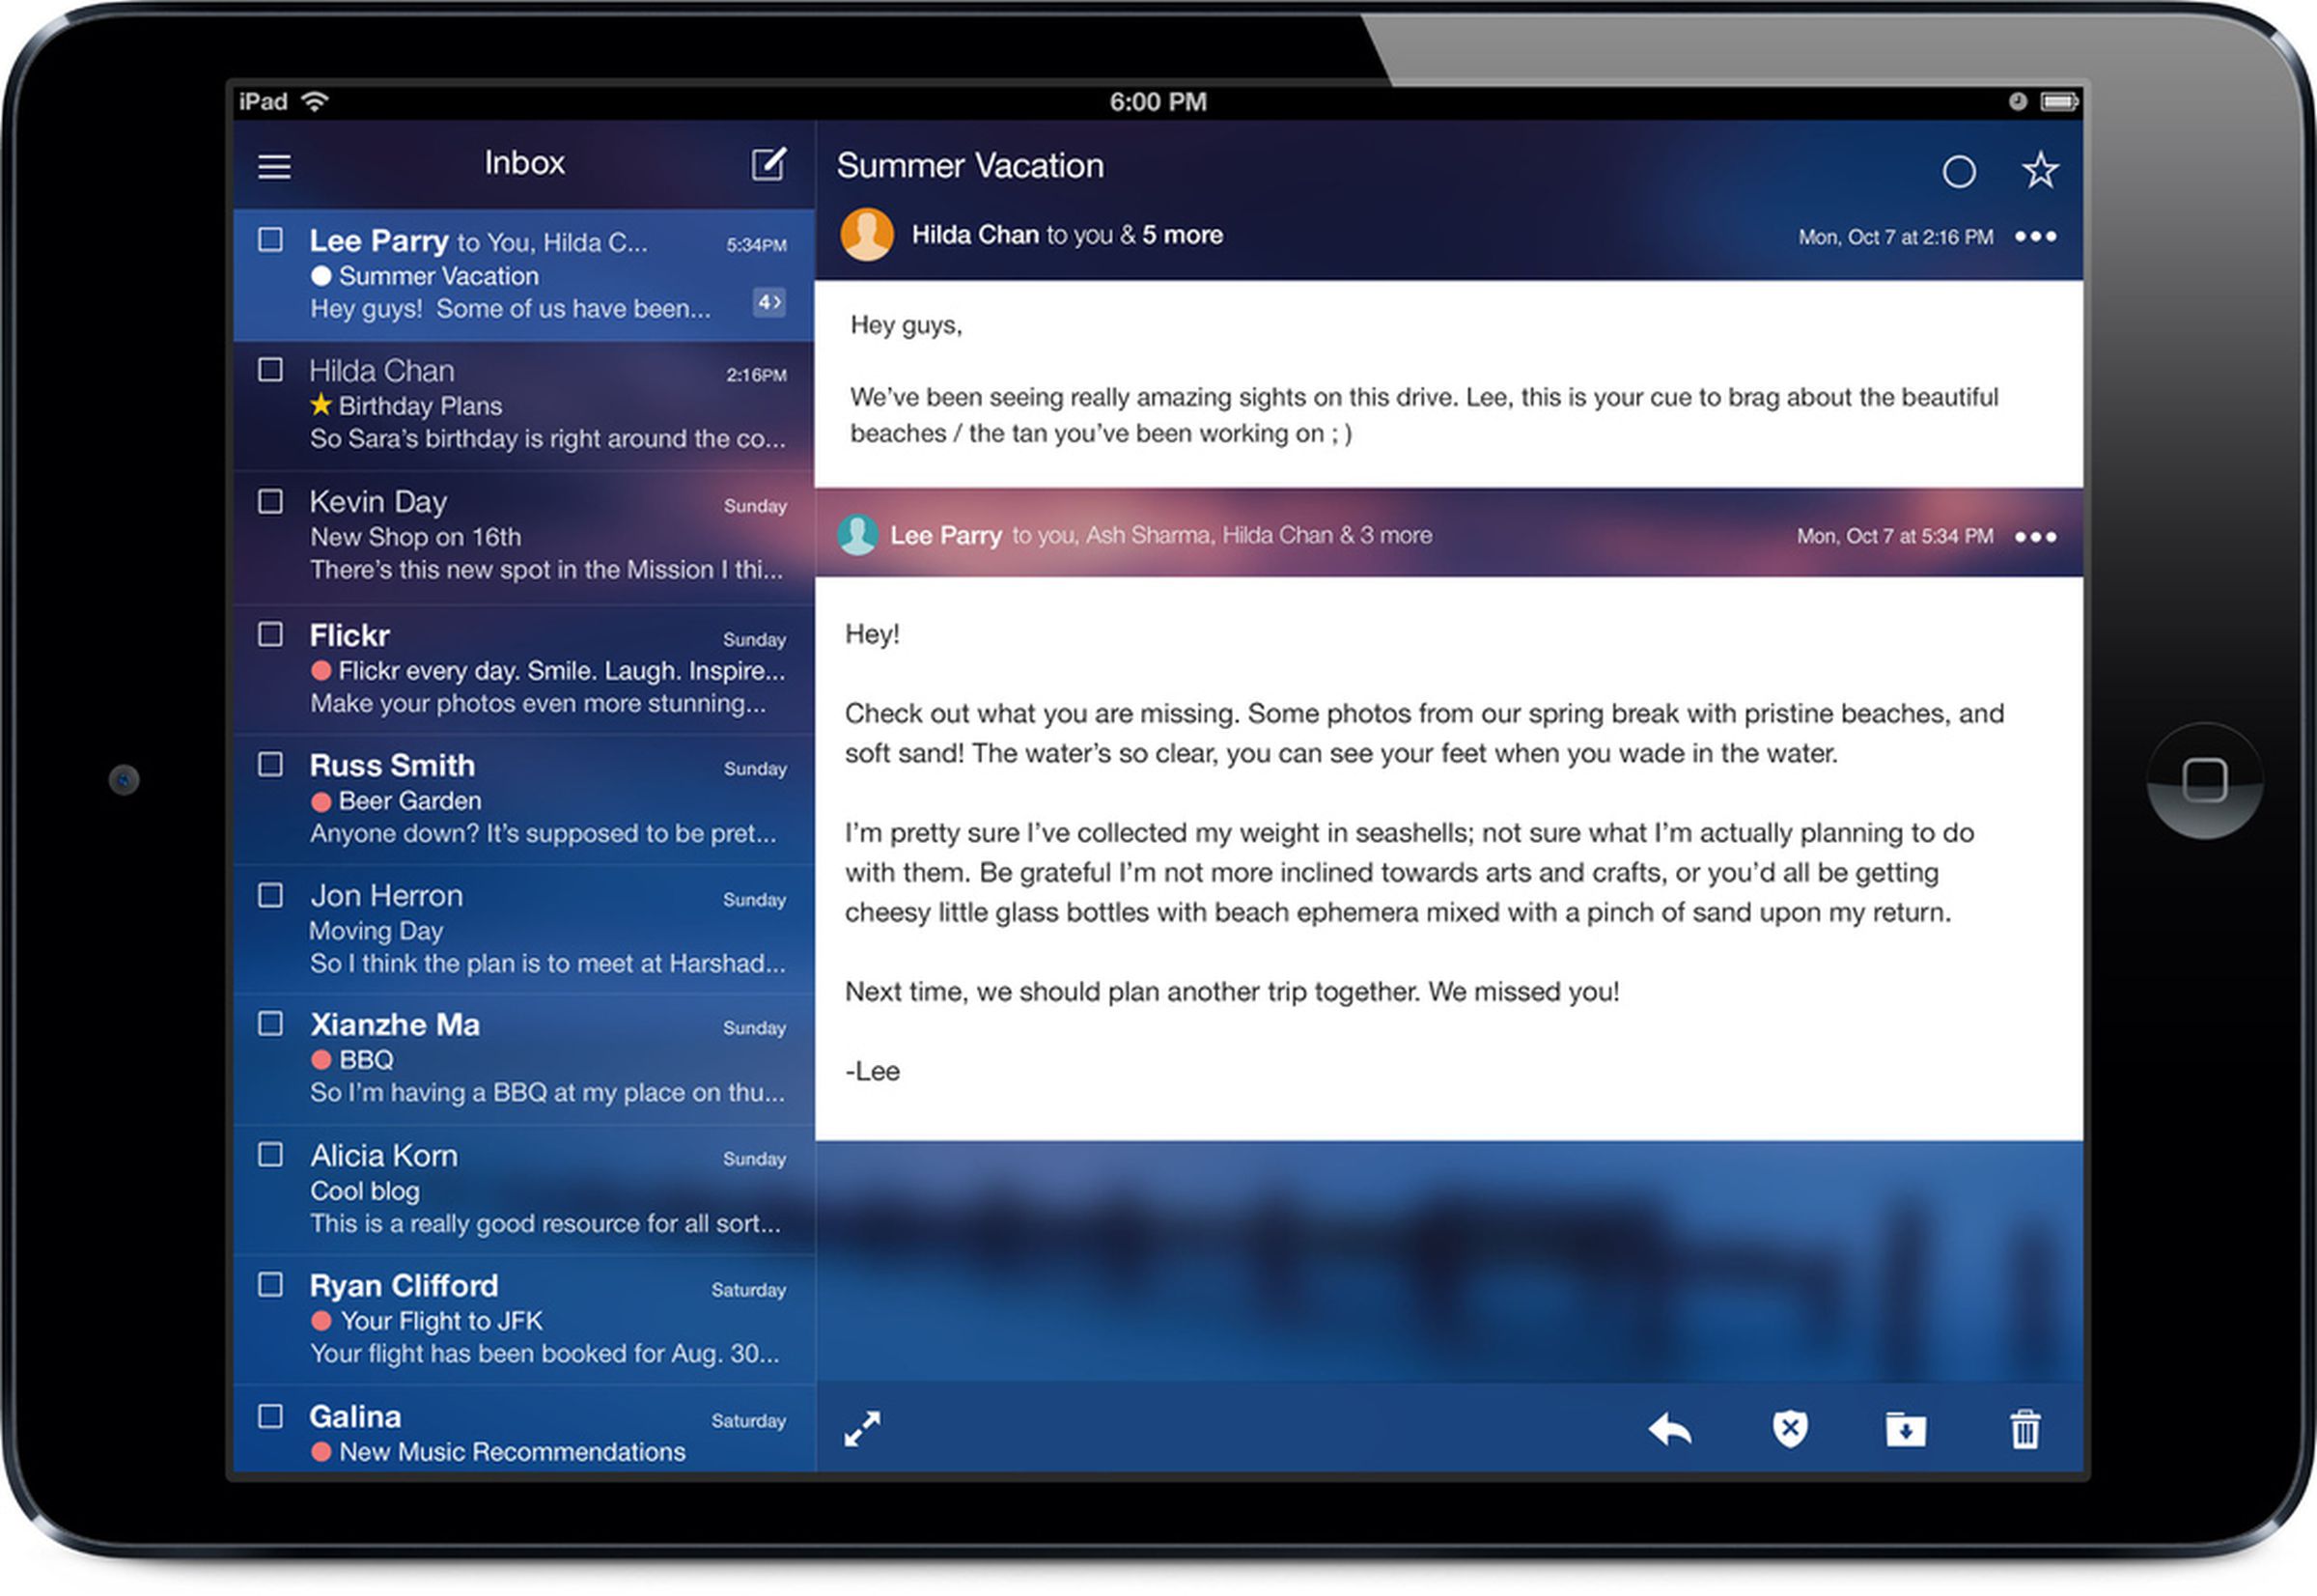 Redesigned Yahoo Mail for web and mobile